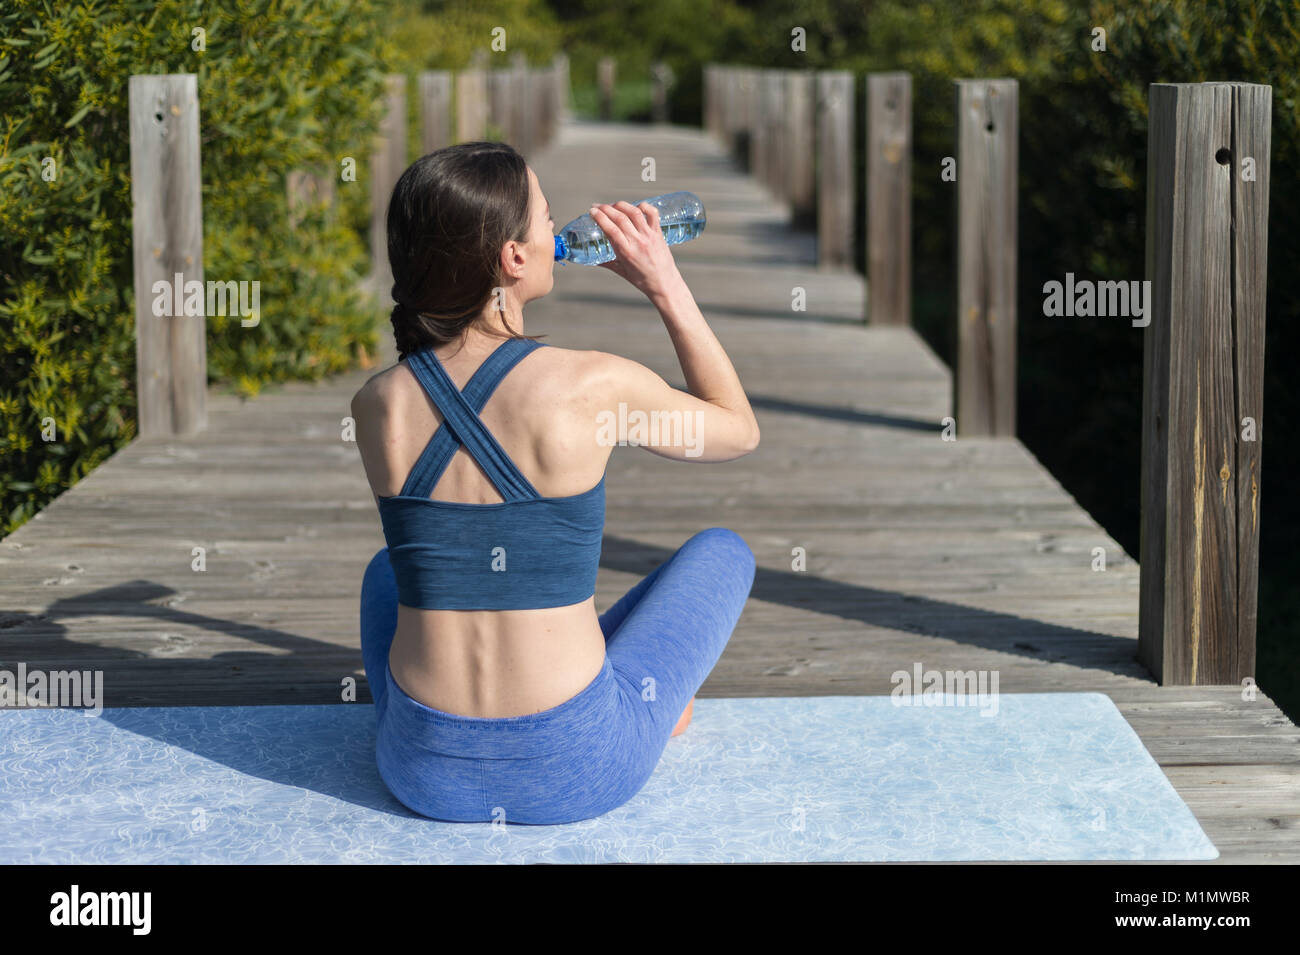 woman sitting on a yoga exercise mat drinking water from a bottle. Outdoors. Stock Photo